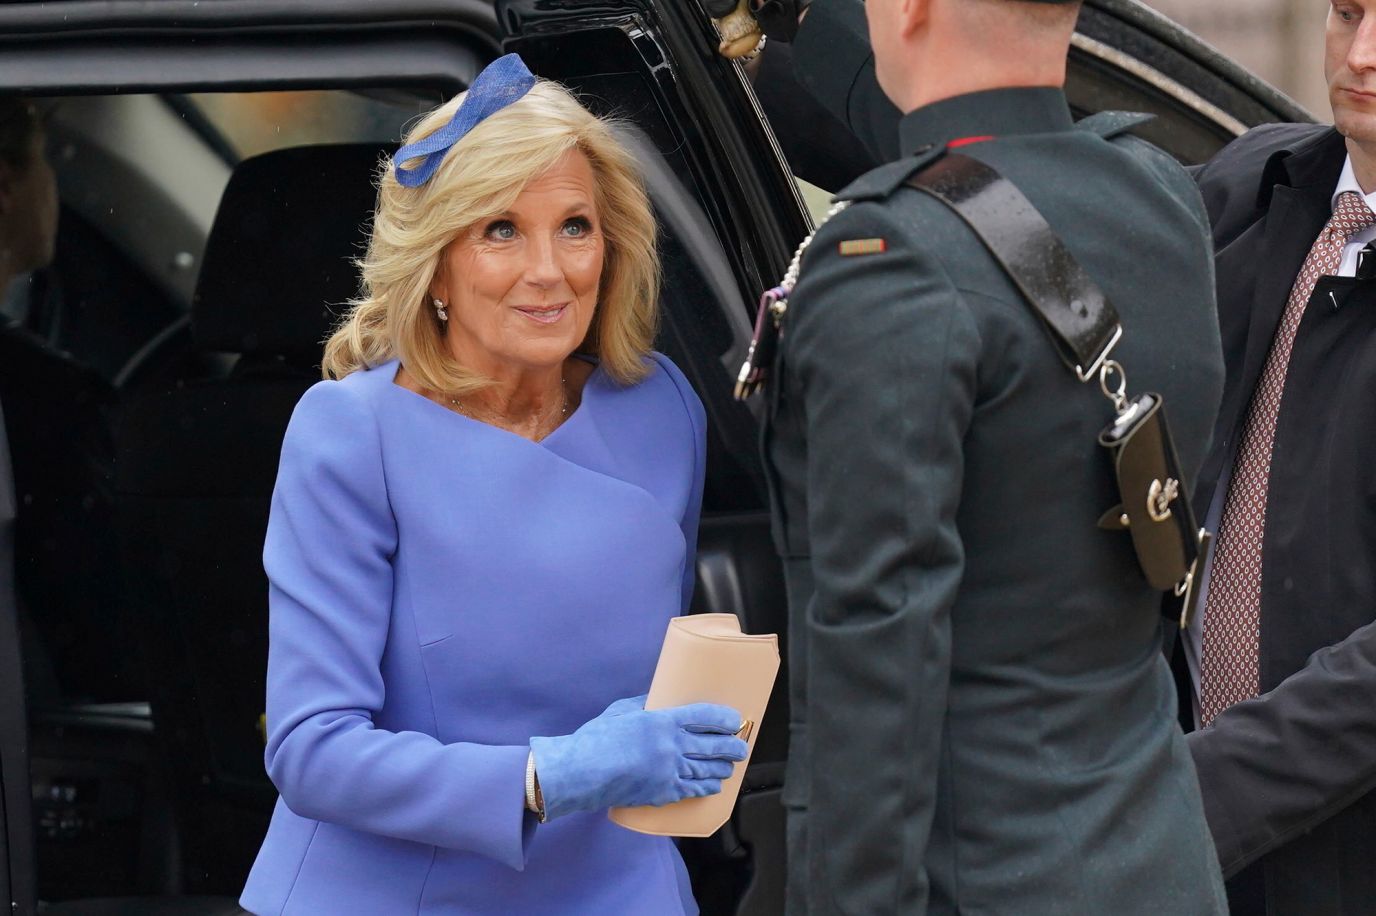 Jill Biden, first lady of the United States, arrives at Westminster Abbey. Biden, <a href='https://www.cnn.com/uk/live-news/king-charles-iii-coronation-ckc-intl-gbr/h_054e67e7c5ebf898814c9b3c1126fb9f' target='_blank'>who is leading the US delegation</a>, traveled with her granddaughter Finnegan Biden.